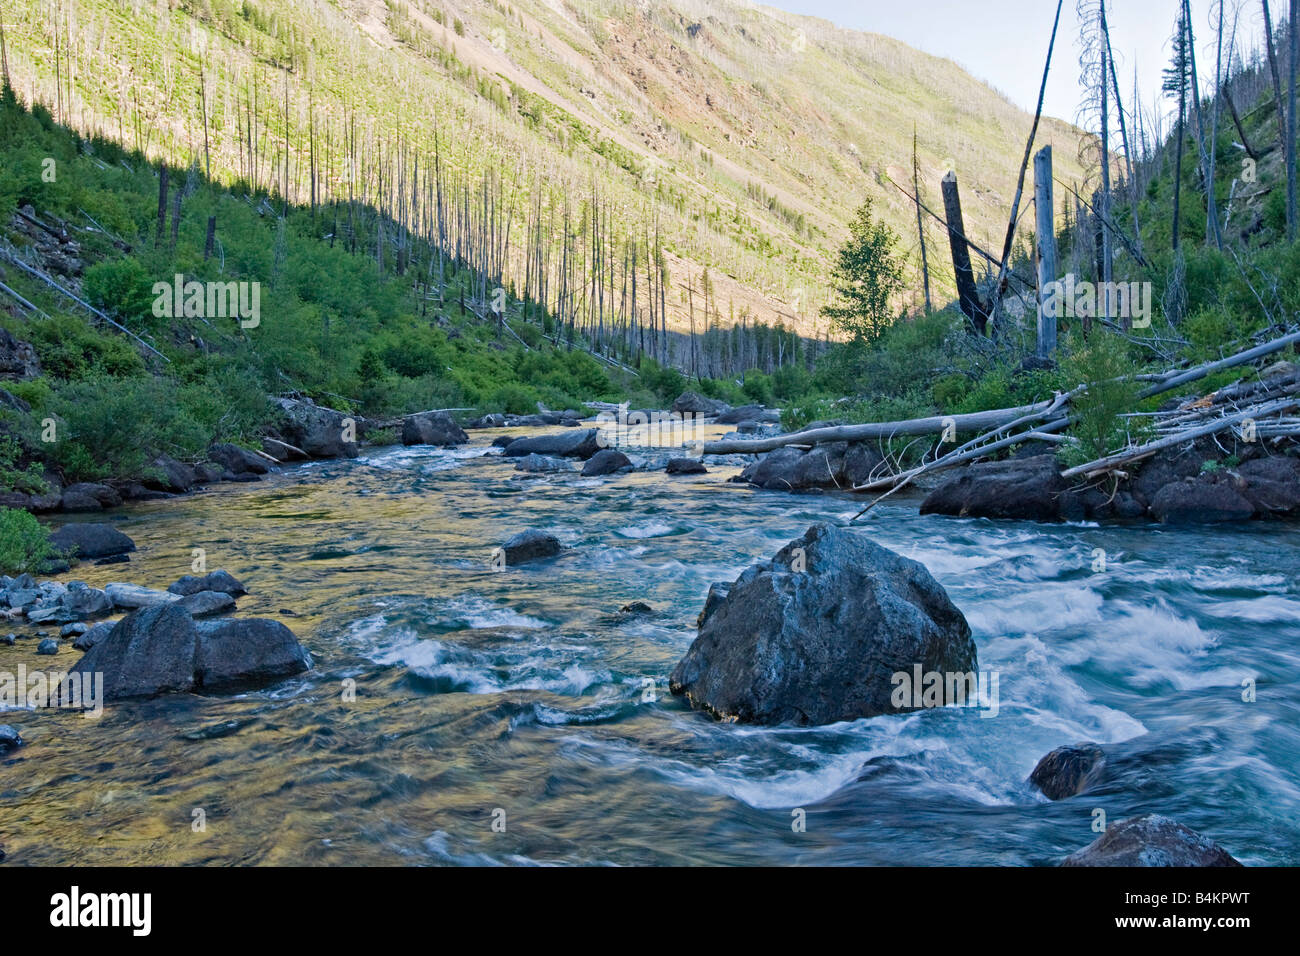 The North Fork of the Blackfoot River in the Scapegoat Wilderness Area ...